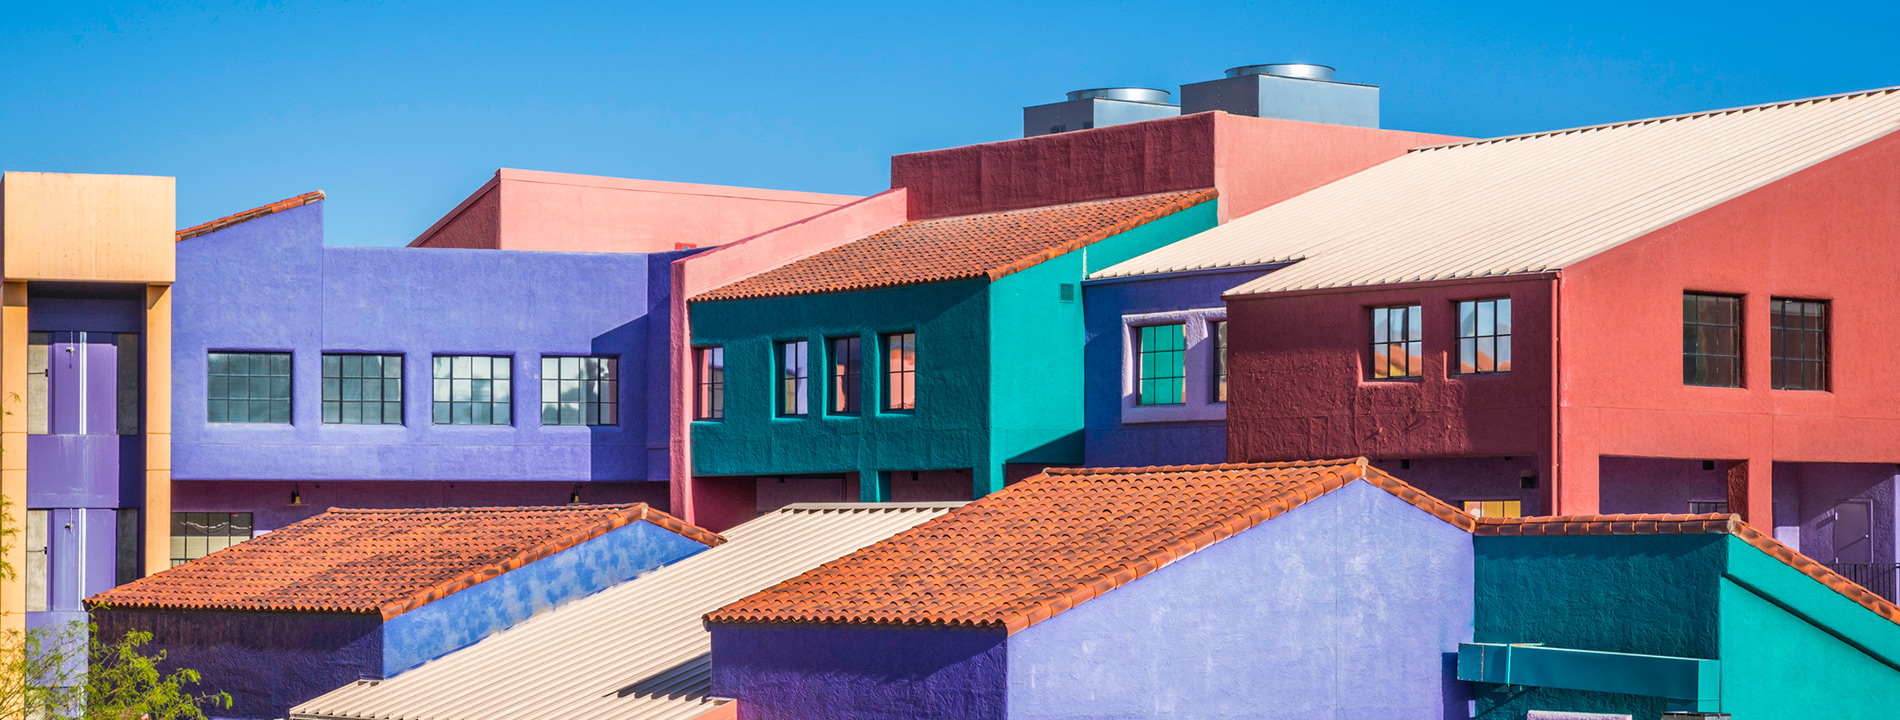 outside view of colorful buildings in a neighborhood